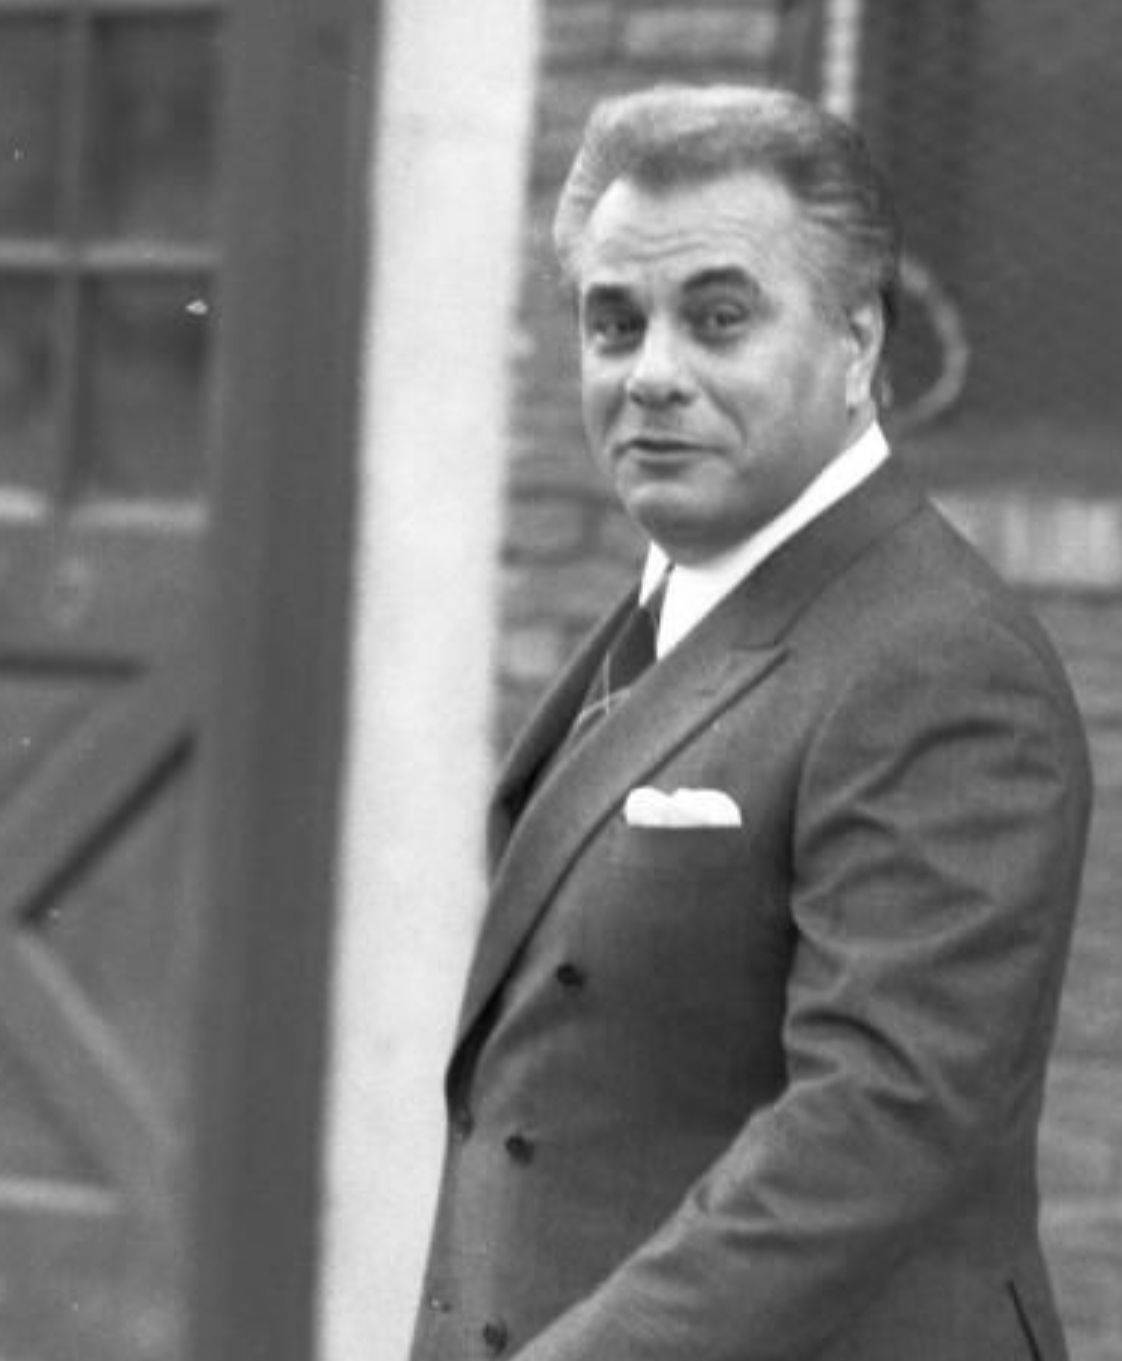 A Powerful Gaze From The Notorious John Gotti In Monochrome Background